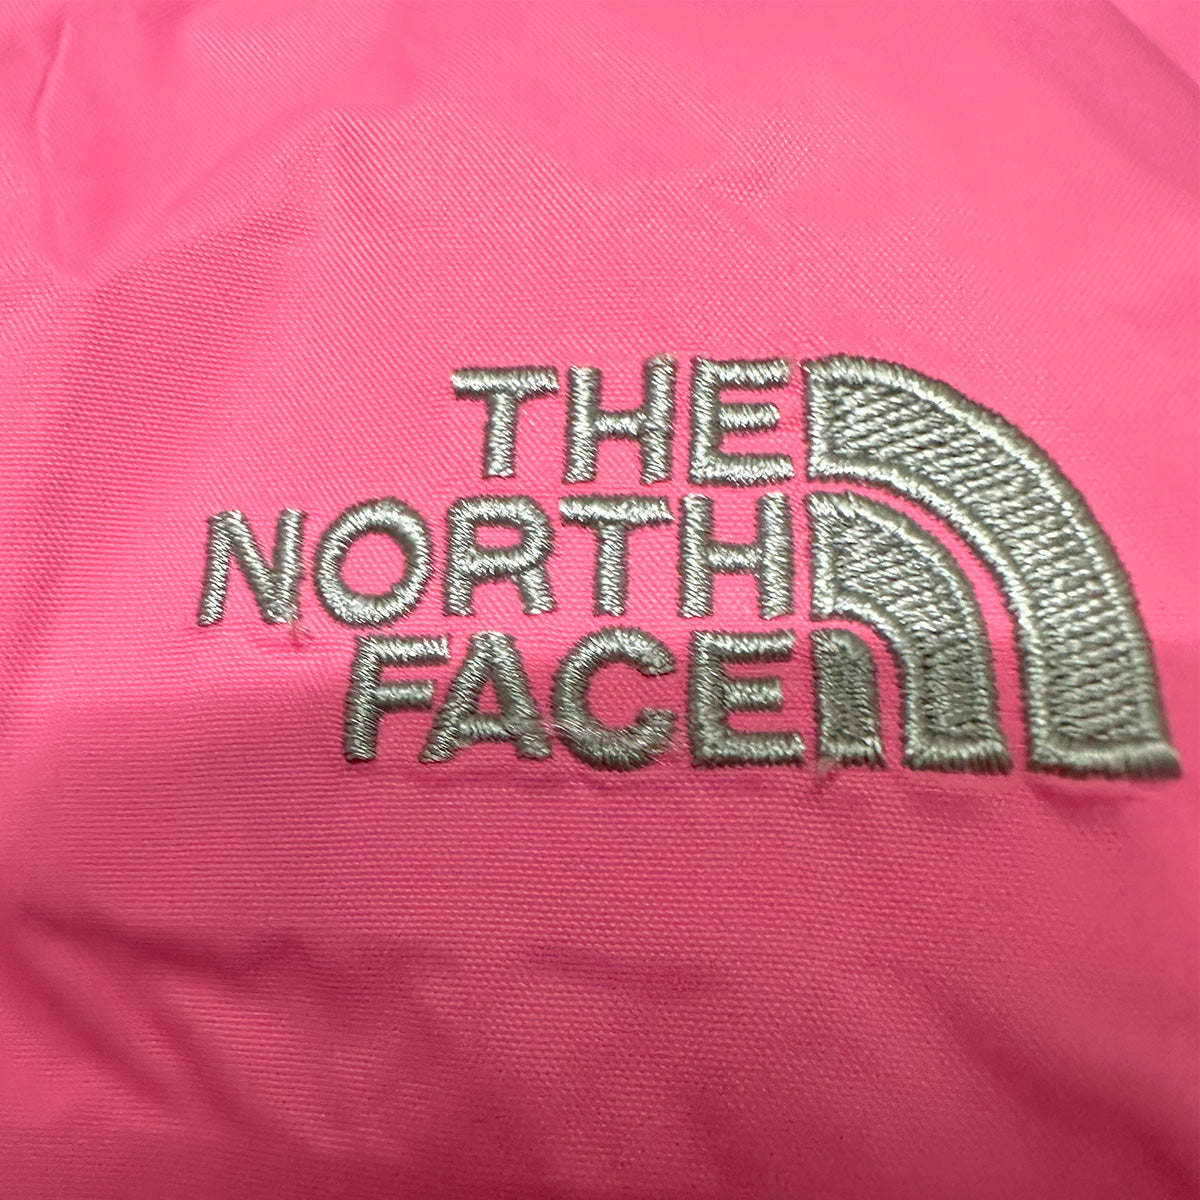 30060 【THE NORTH FACE】ザノースフェイス キッズ マウンテンパーカー ピンク 150